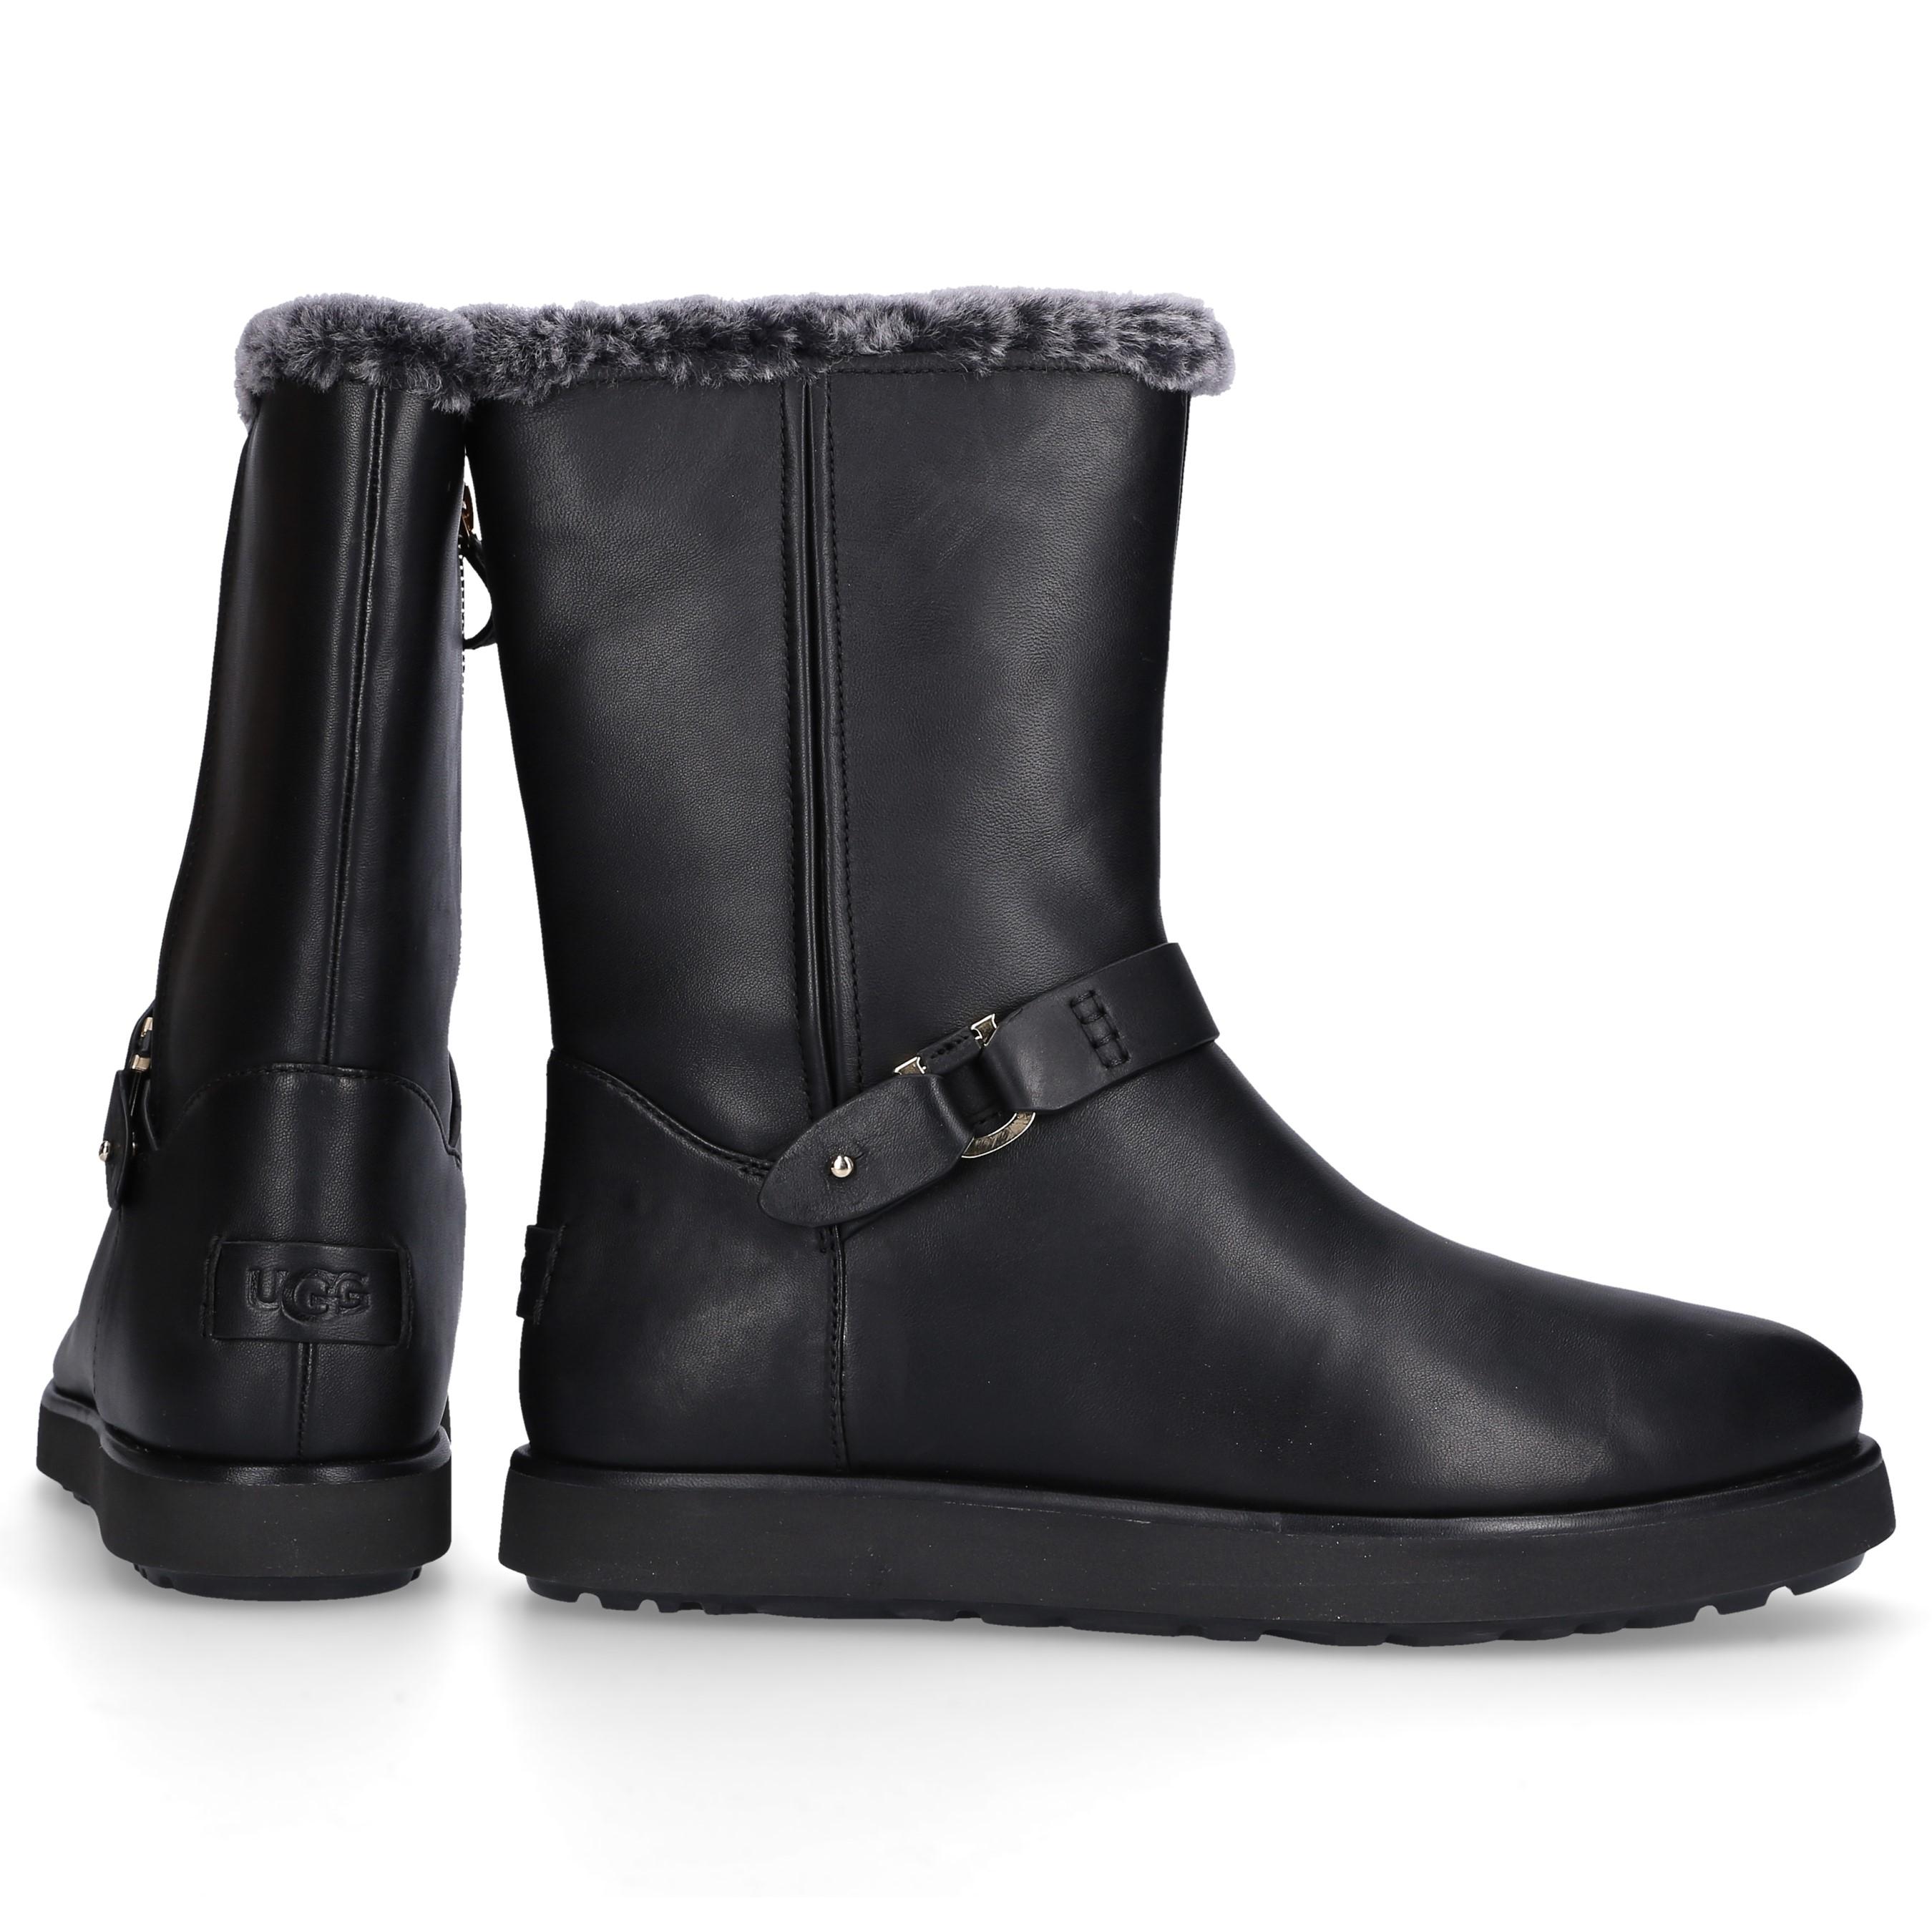 ugg classic leather boots